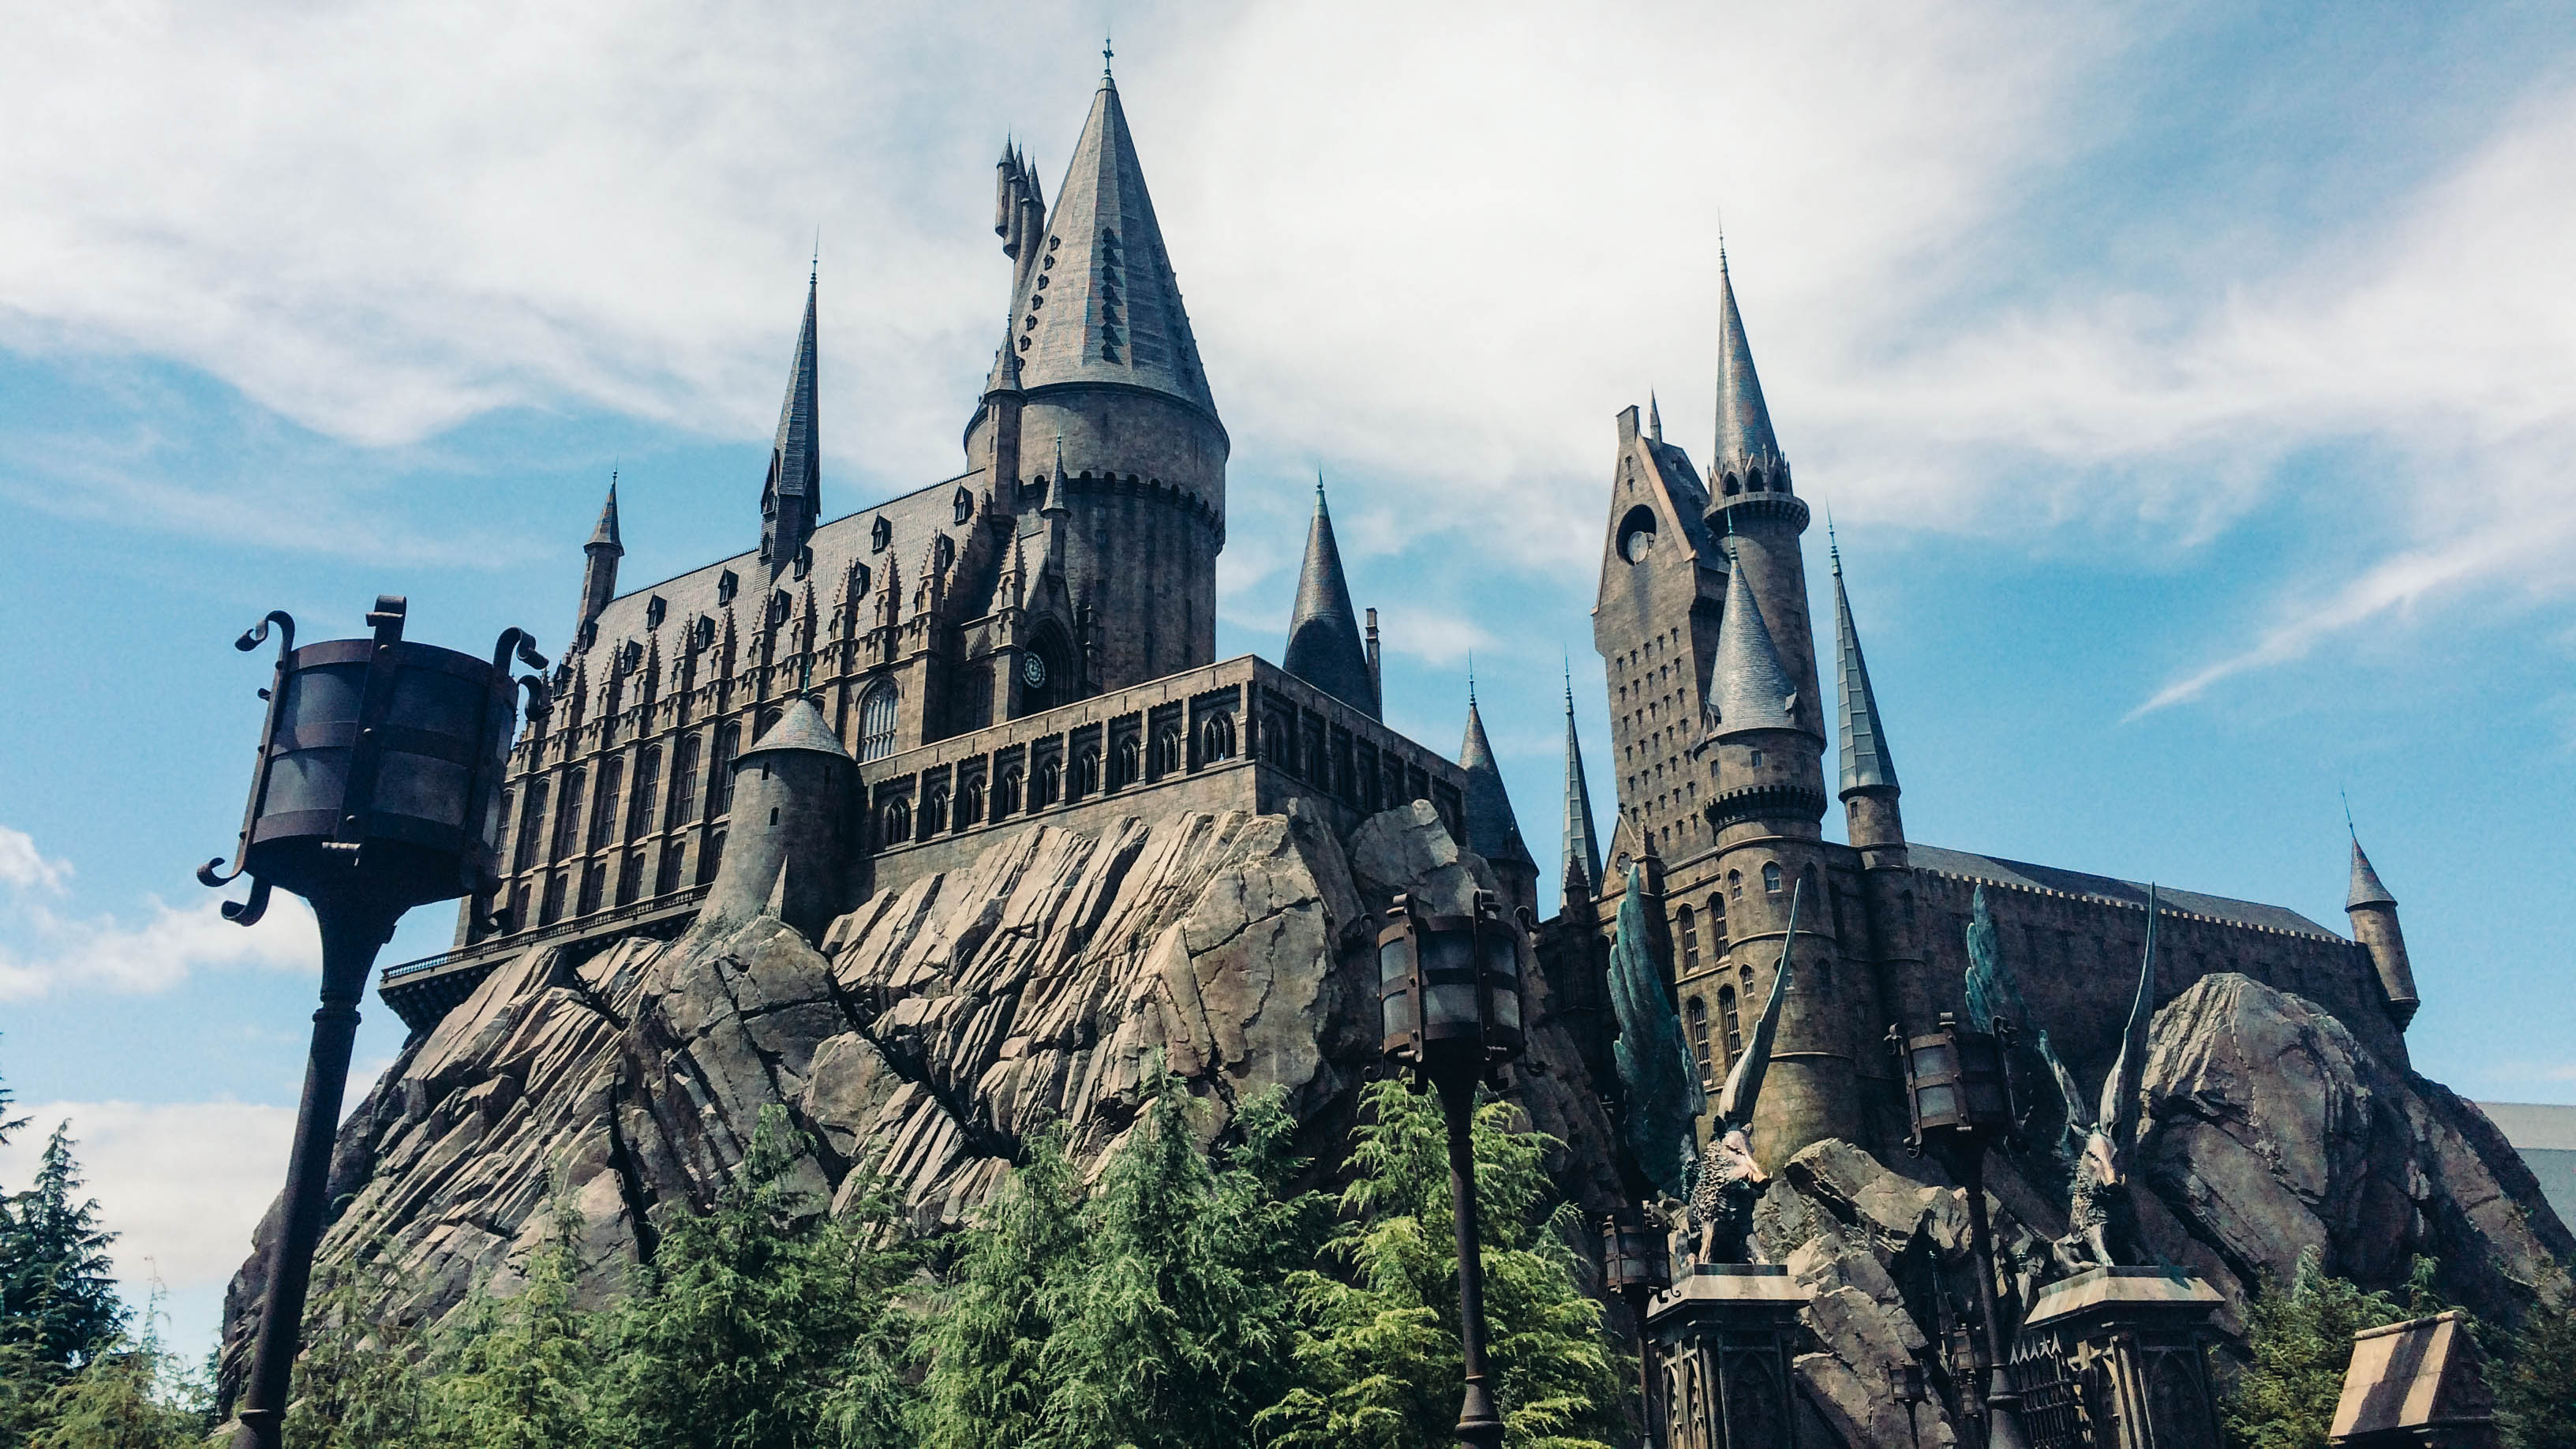 Theme park guide: The Wizarding World of Harry Potter in Osaka, Japan